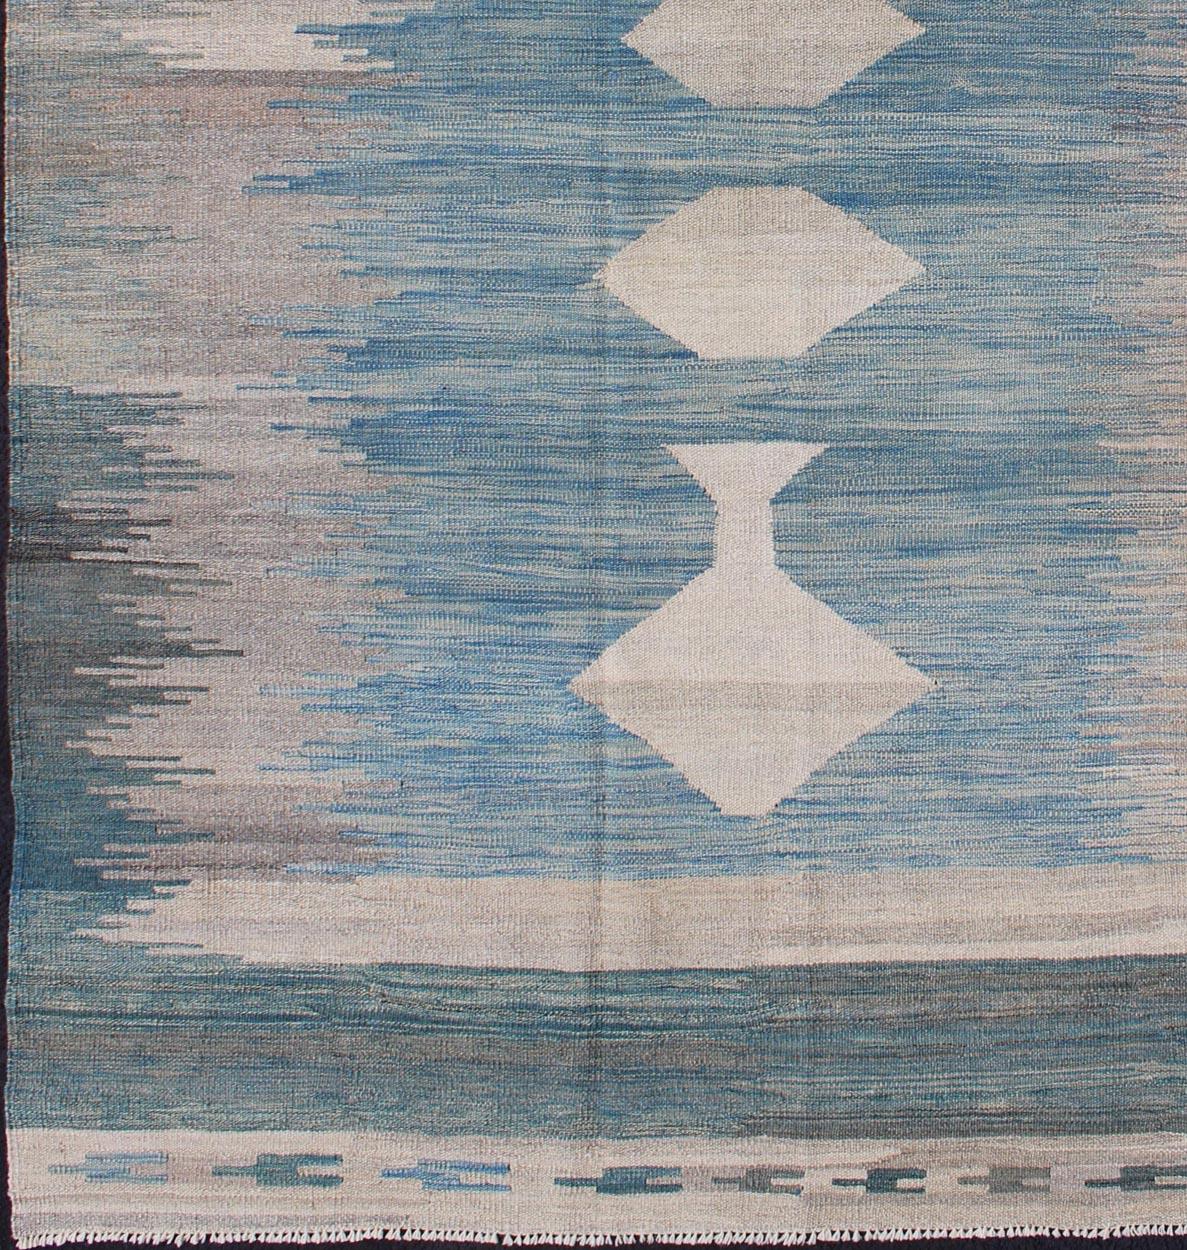 Afghan Modern Tribal Kilim in Shades of Blue's and Gray's For Sale